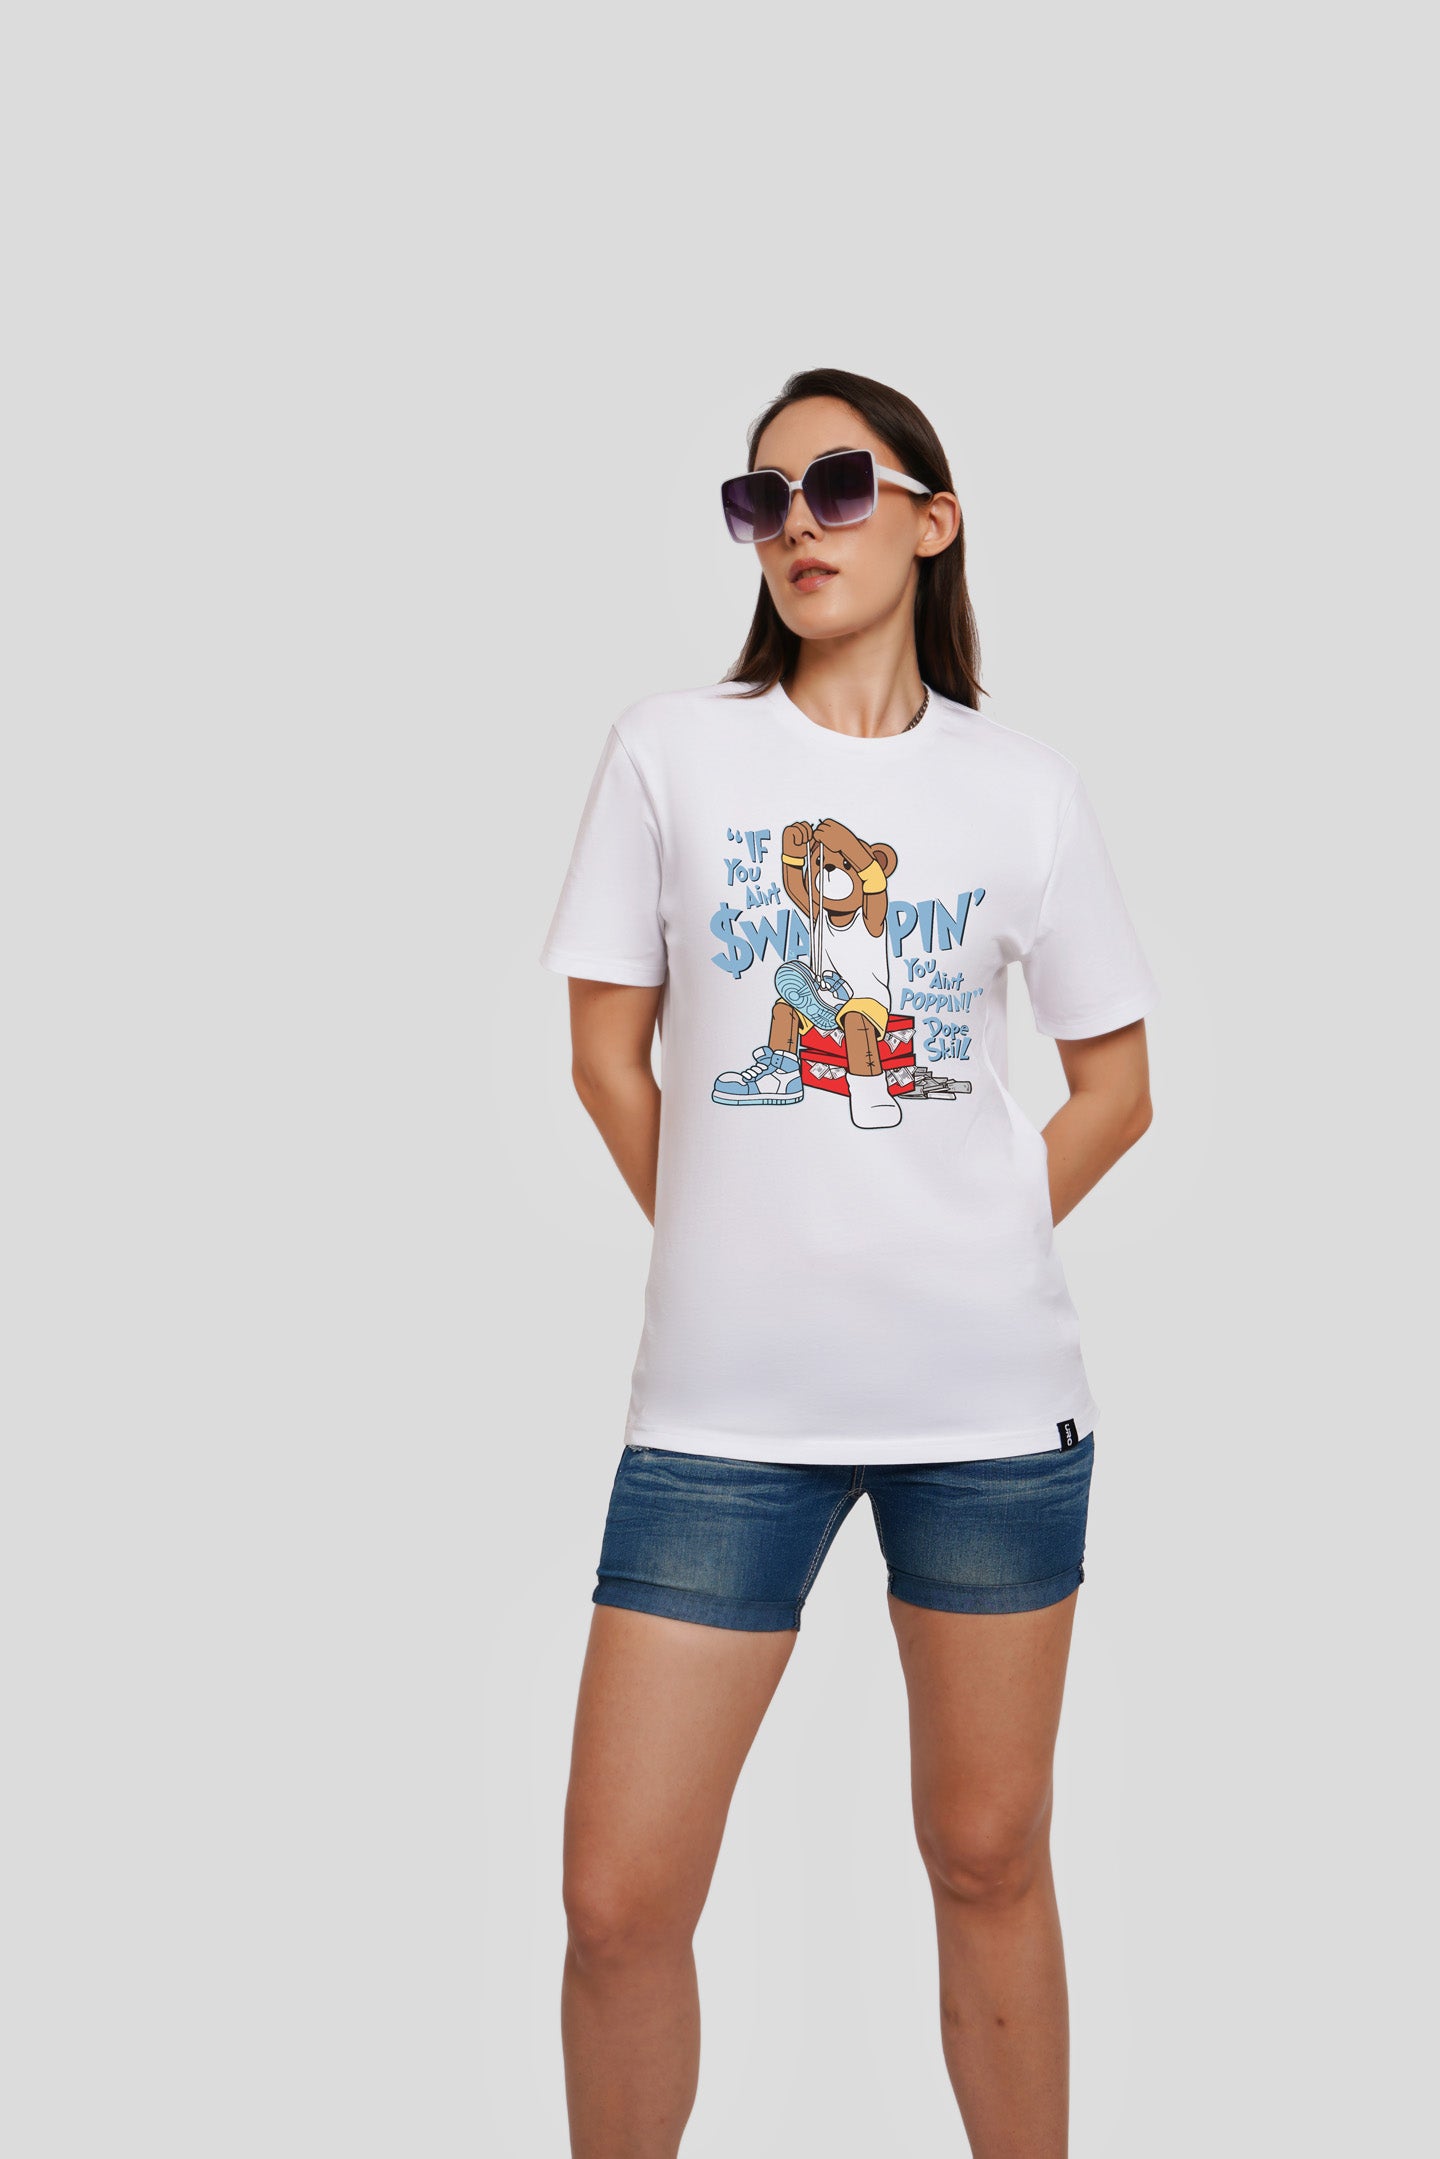 Dope Skill White Printed T Shirt Women Boyfriend Fit With Front Design Pic 1